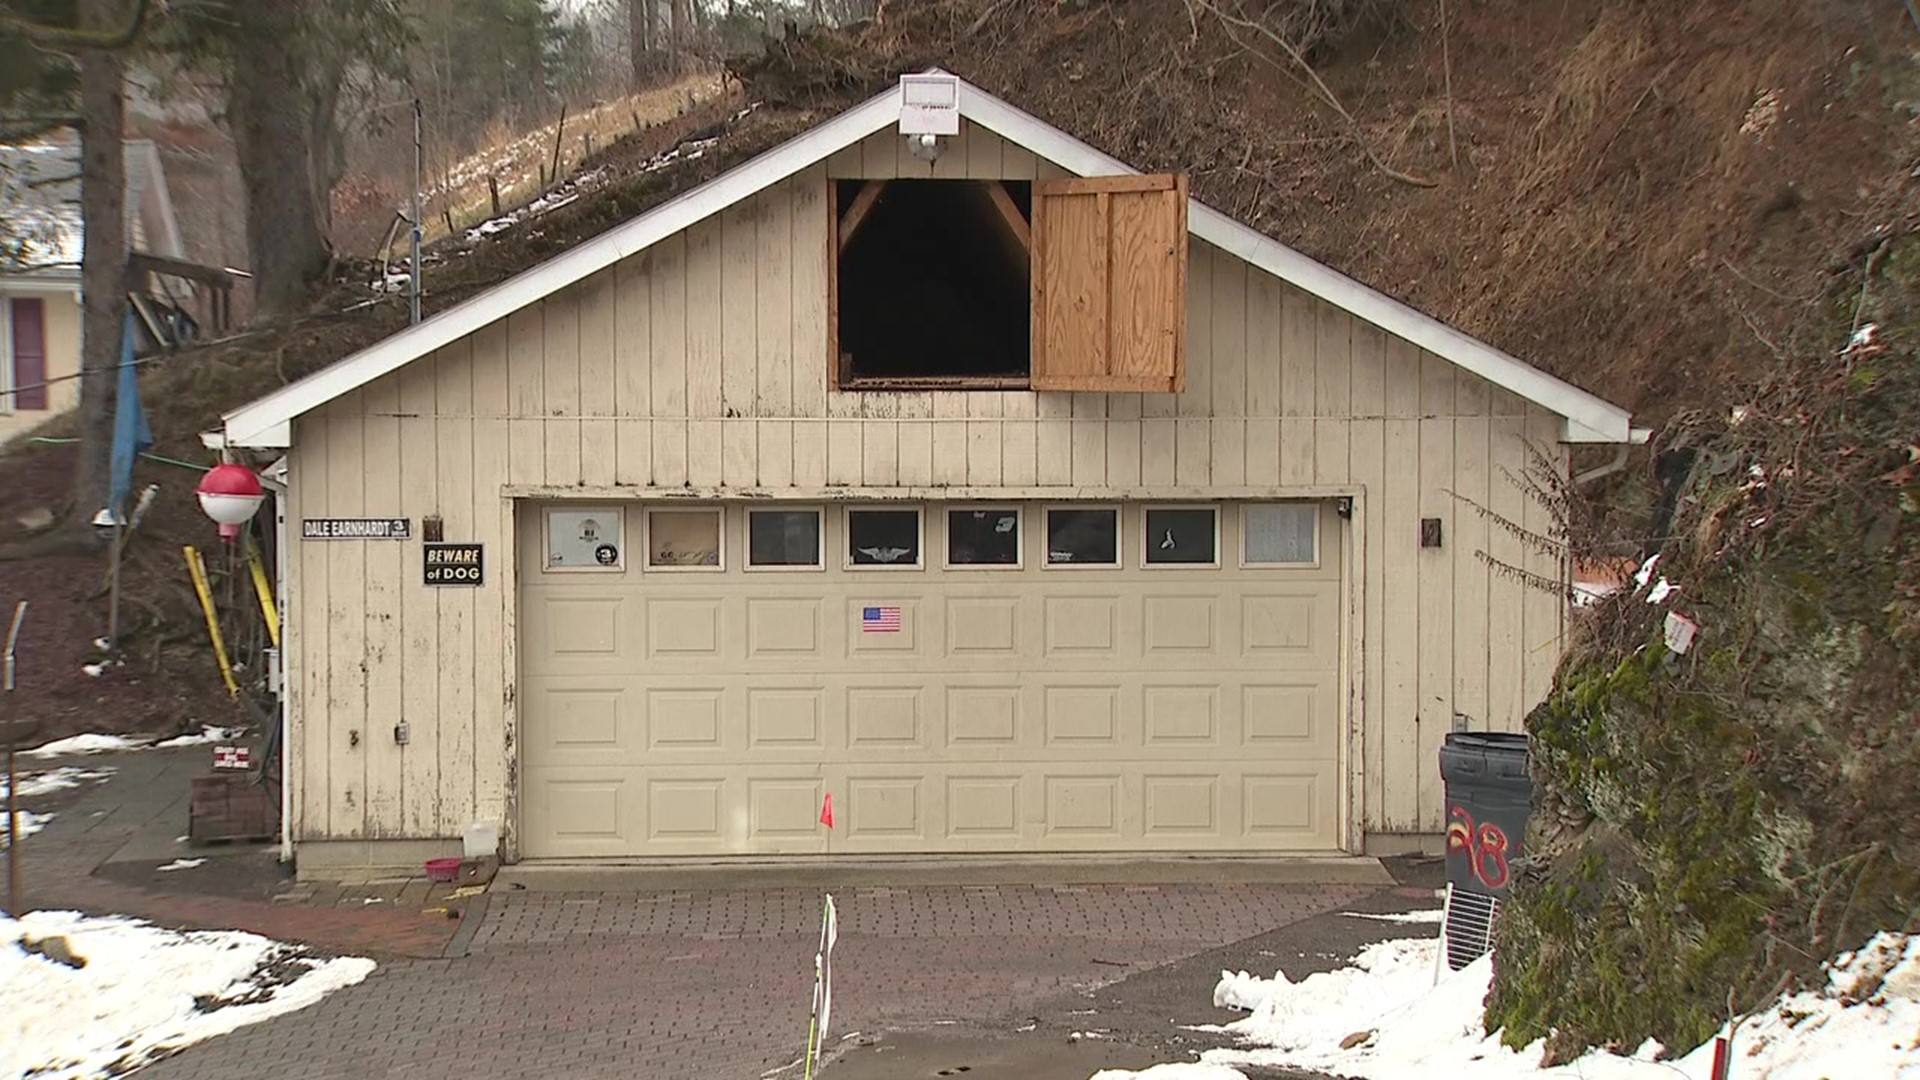 The apparent explosion happened early Wednesday in a home near Lehighton.